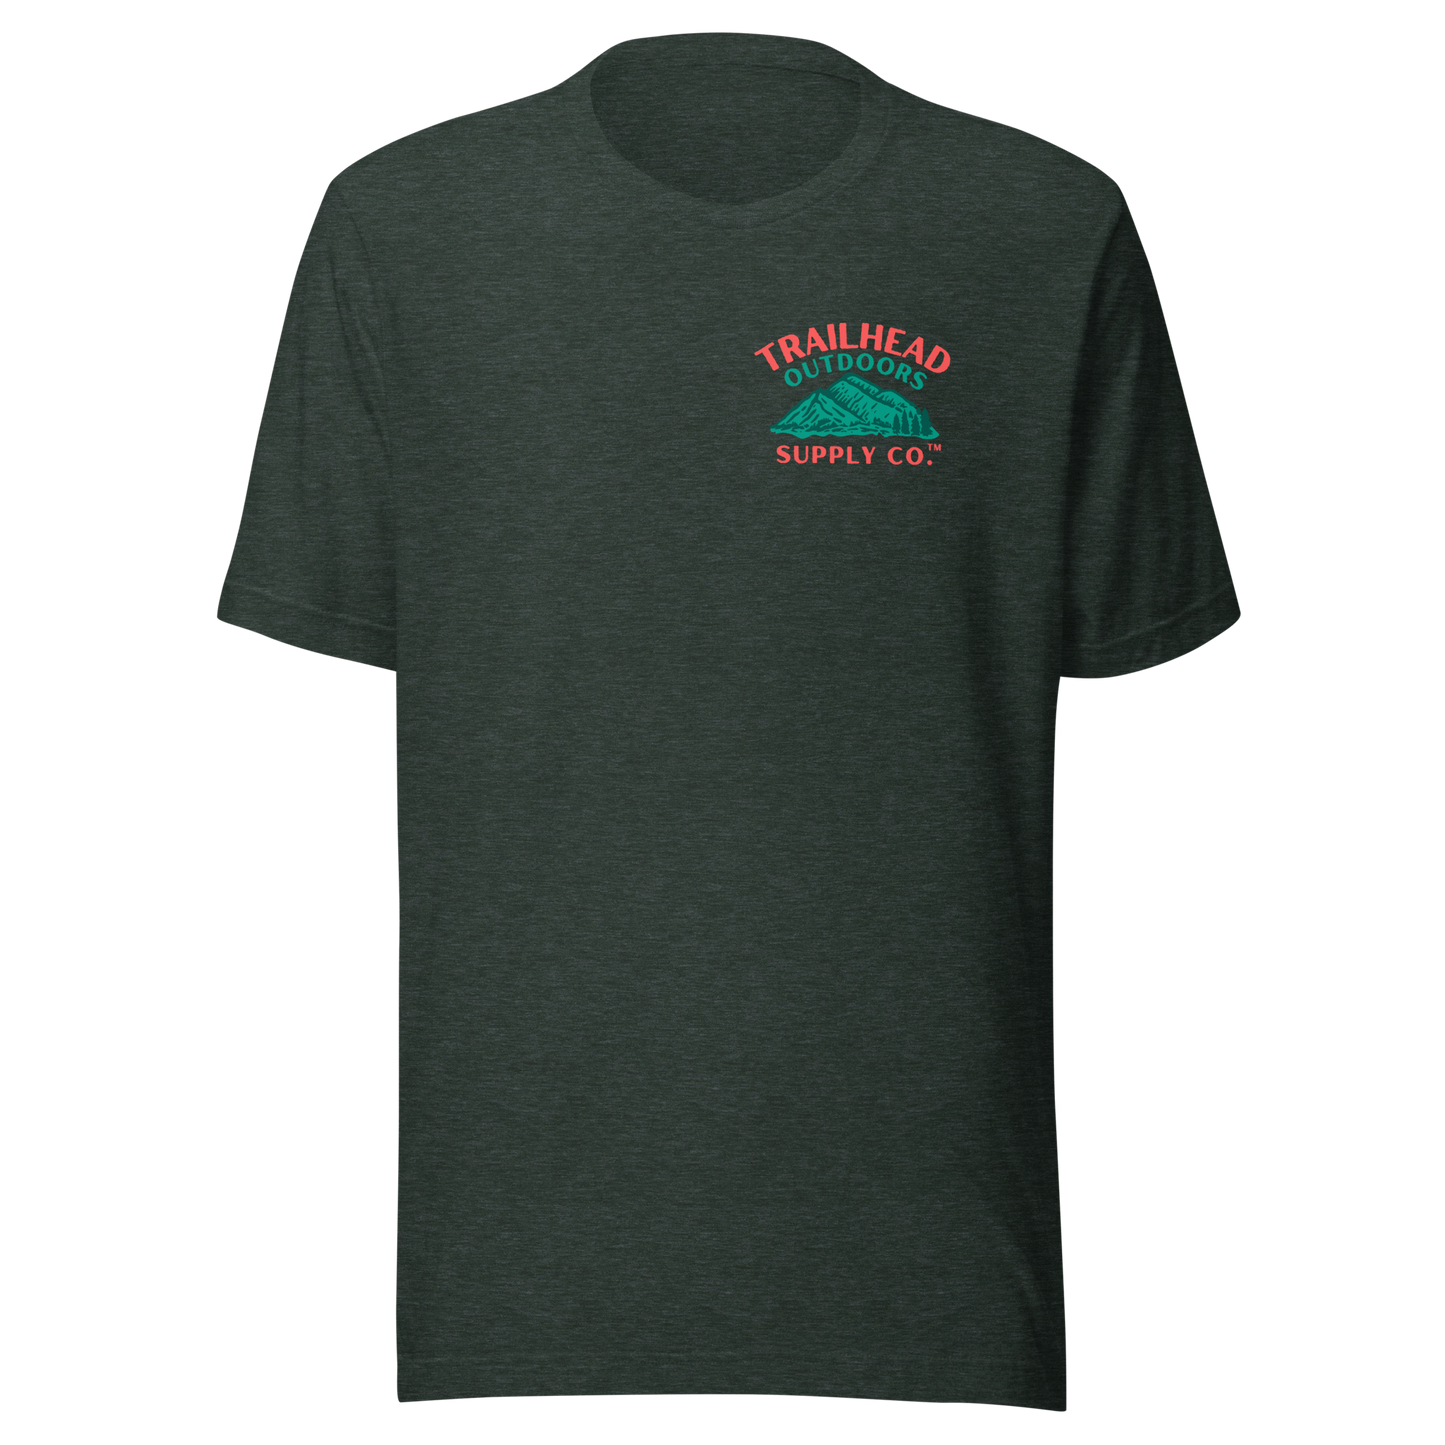 Trailhead Outdoors Supply Co.™ T-Shirt Live Wild, Live Free Bella + Canvas 3100 Front/Back